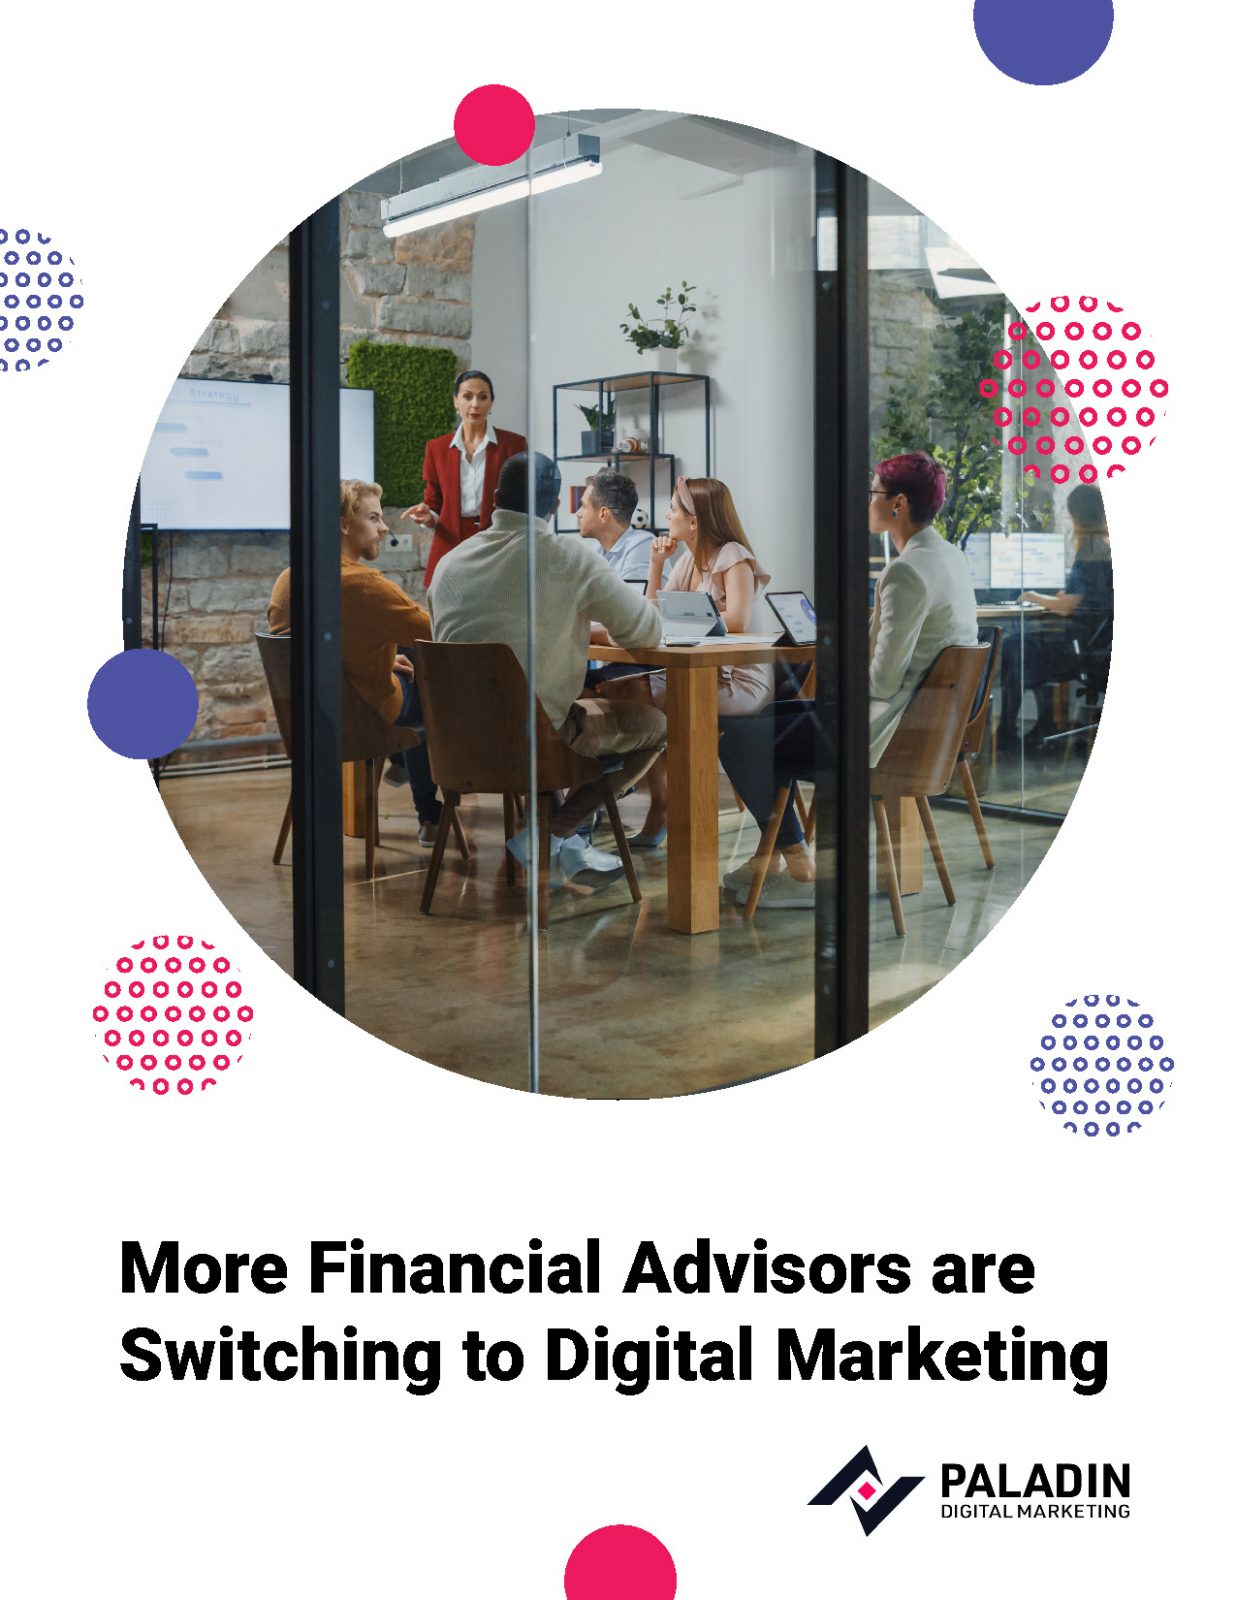 Why Are More Financial Advisors Switching to Digital Marketing?